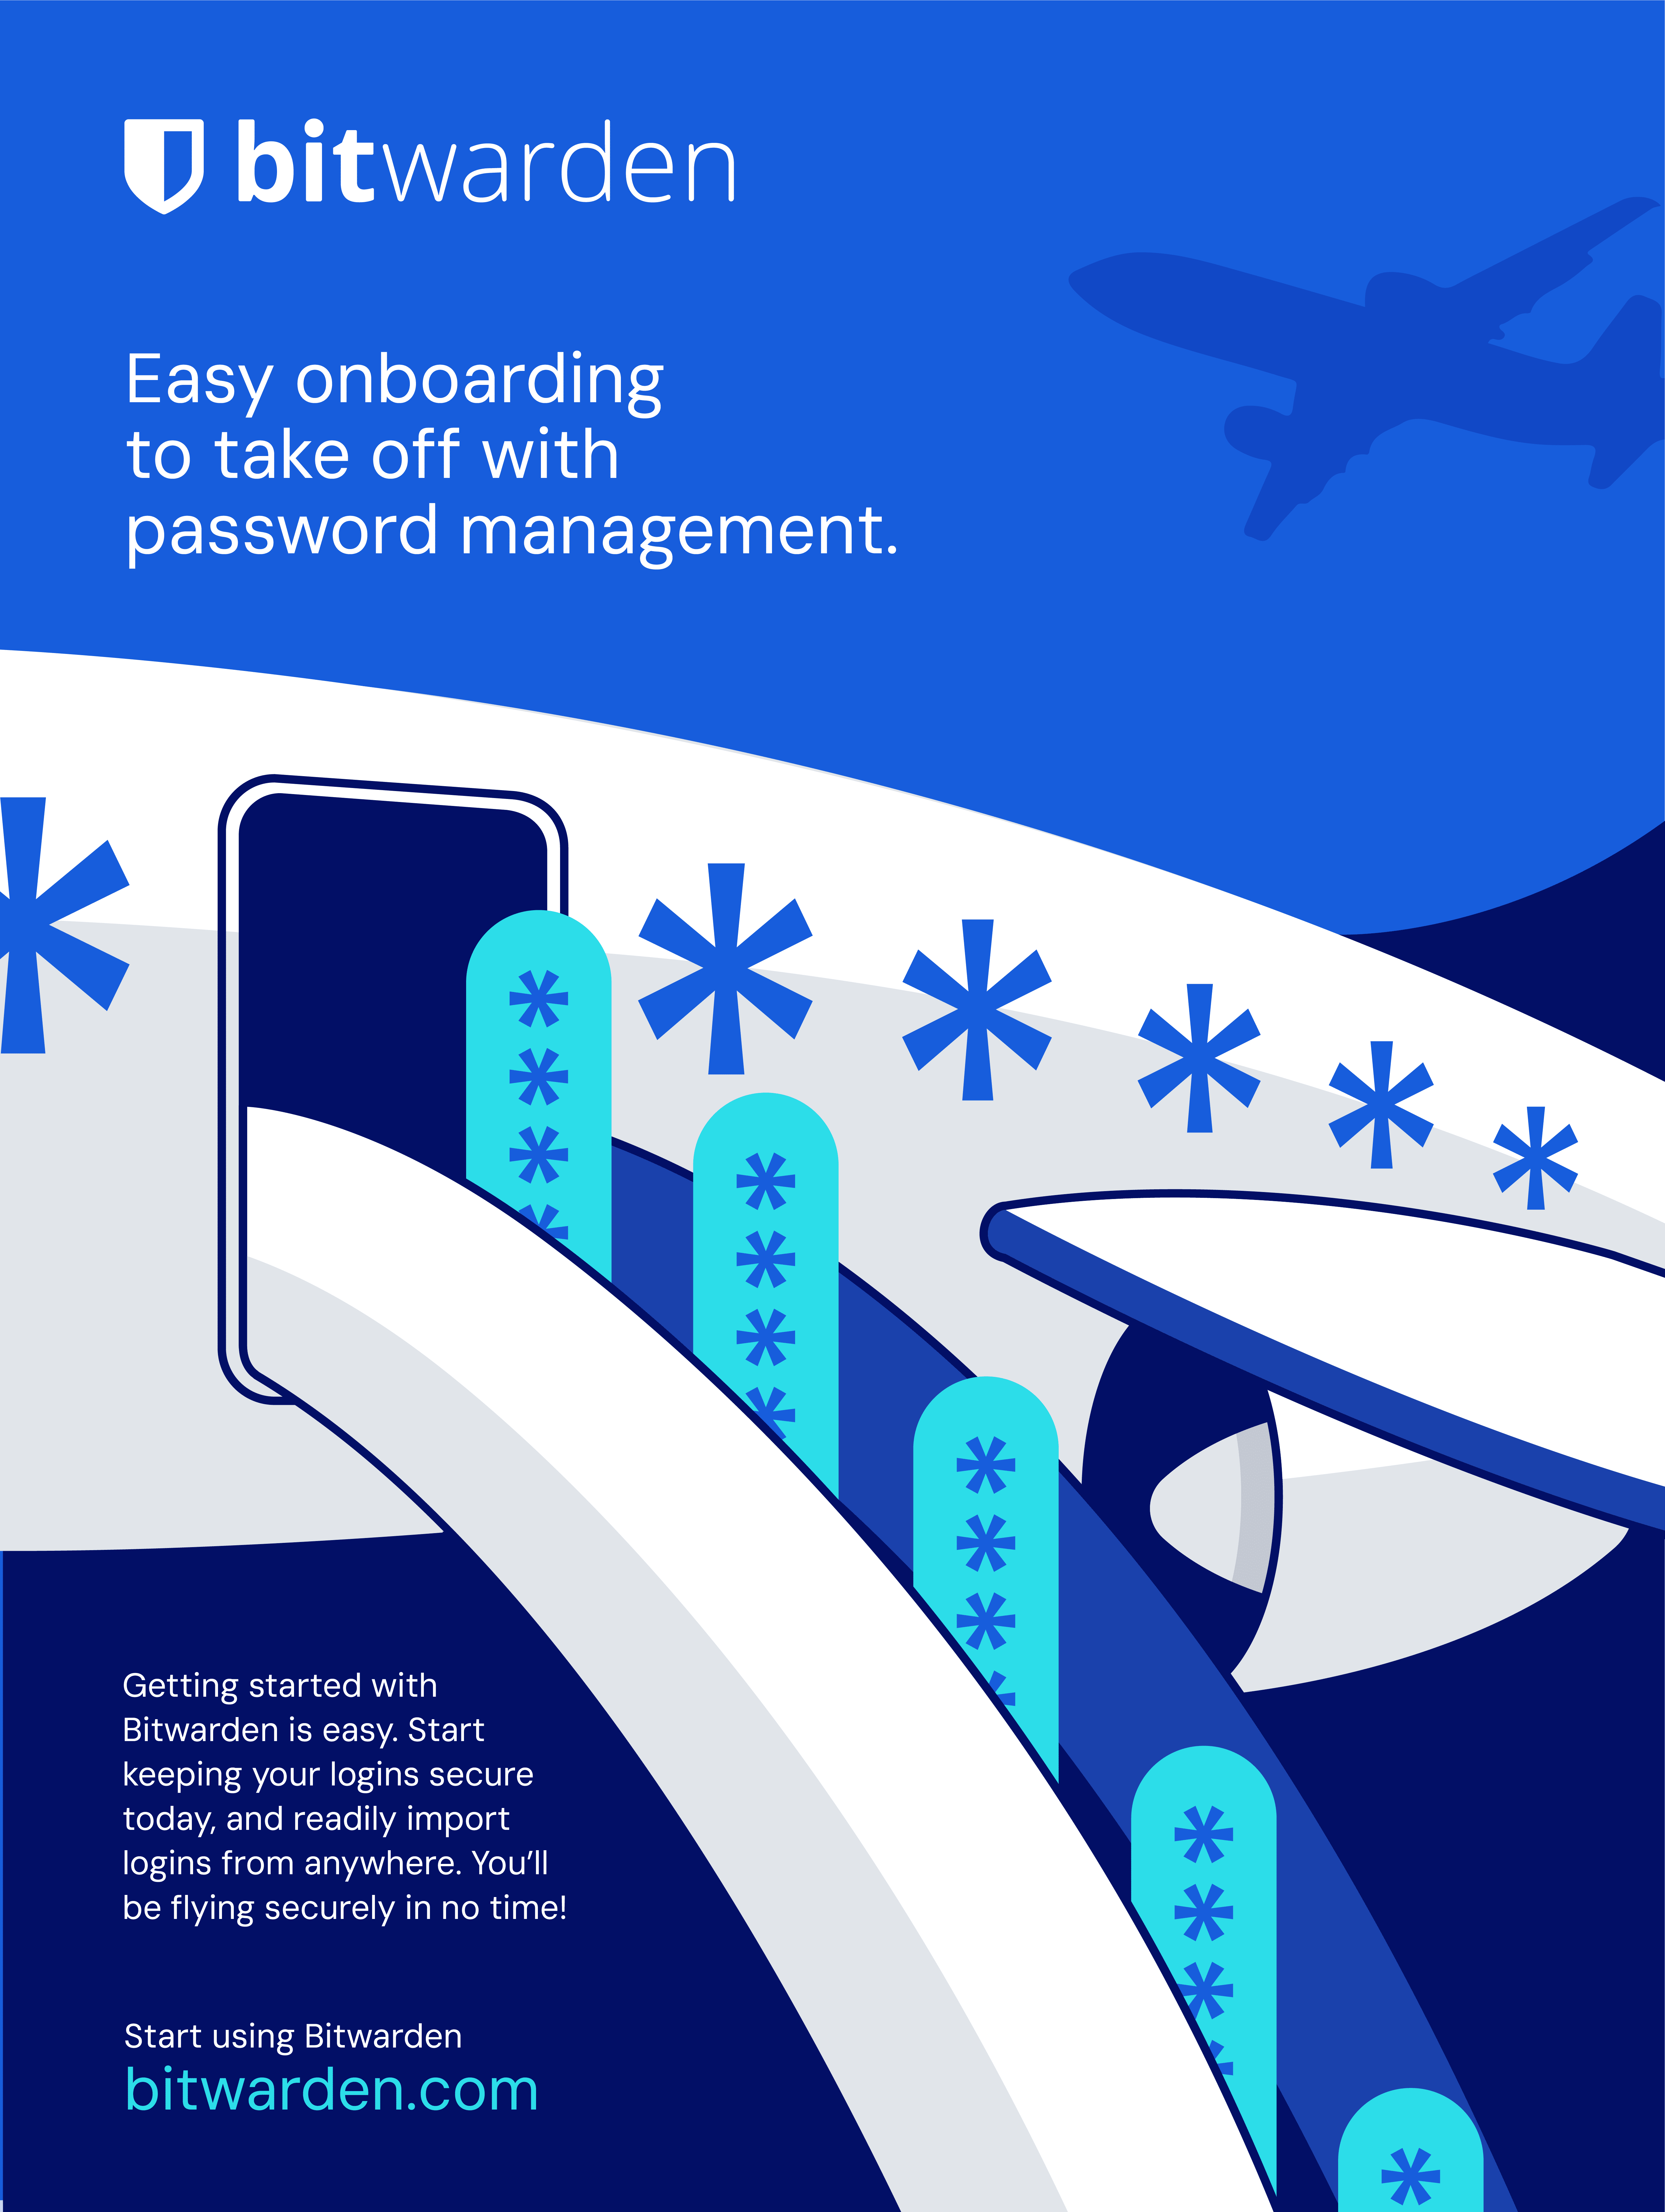 Easy onboarding and takeoff with password management.